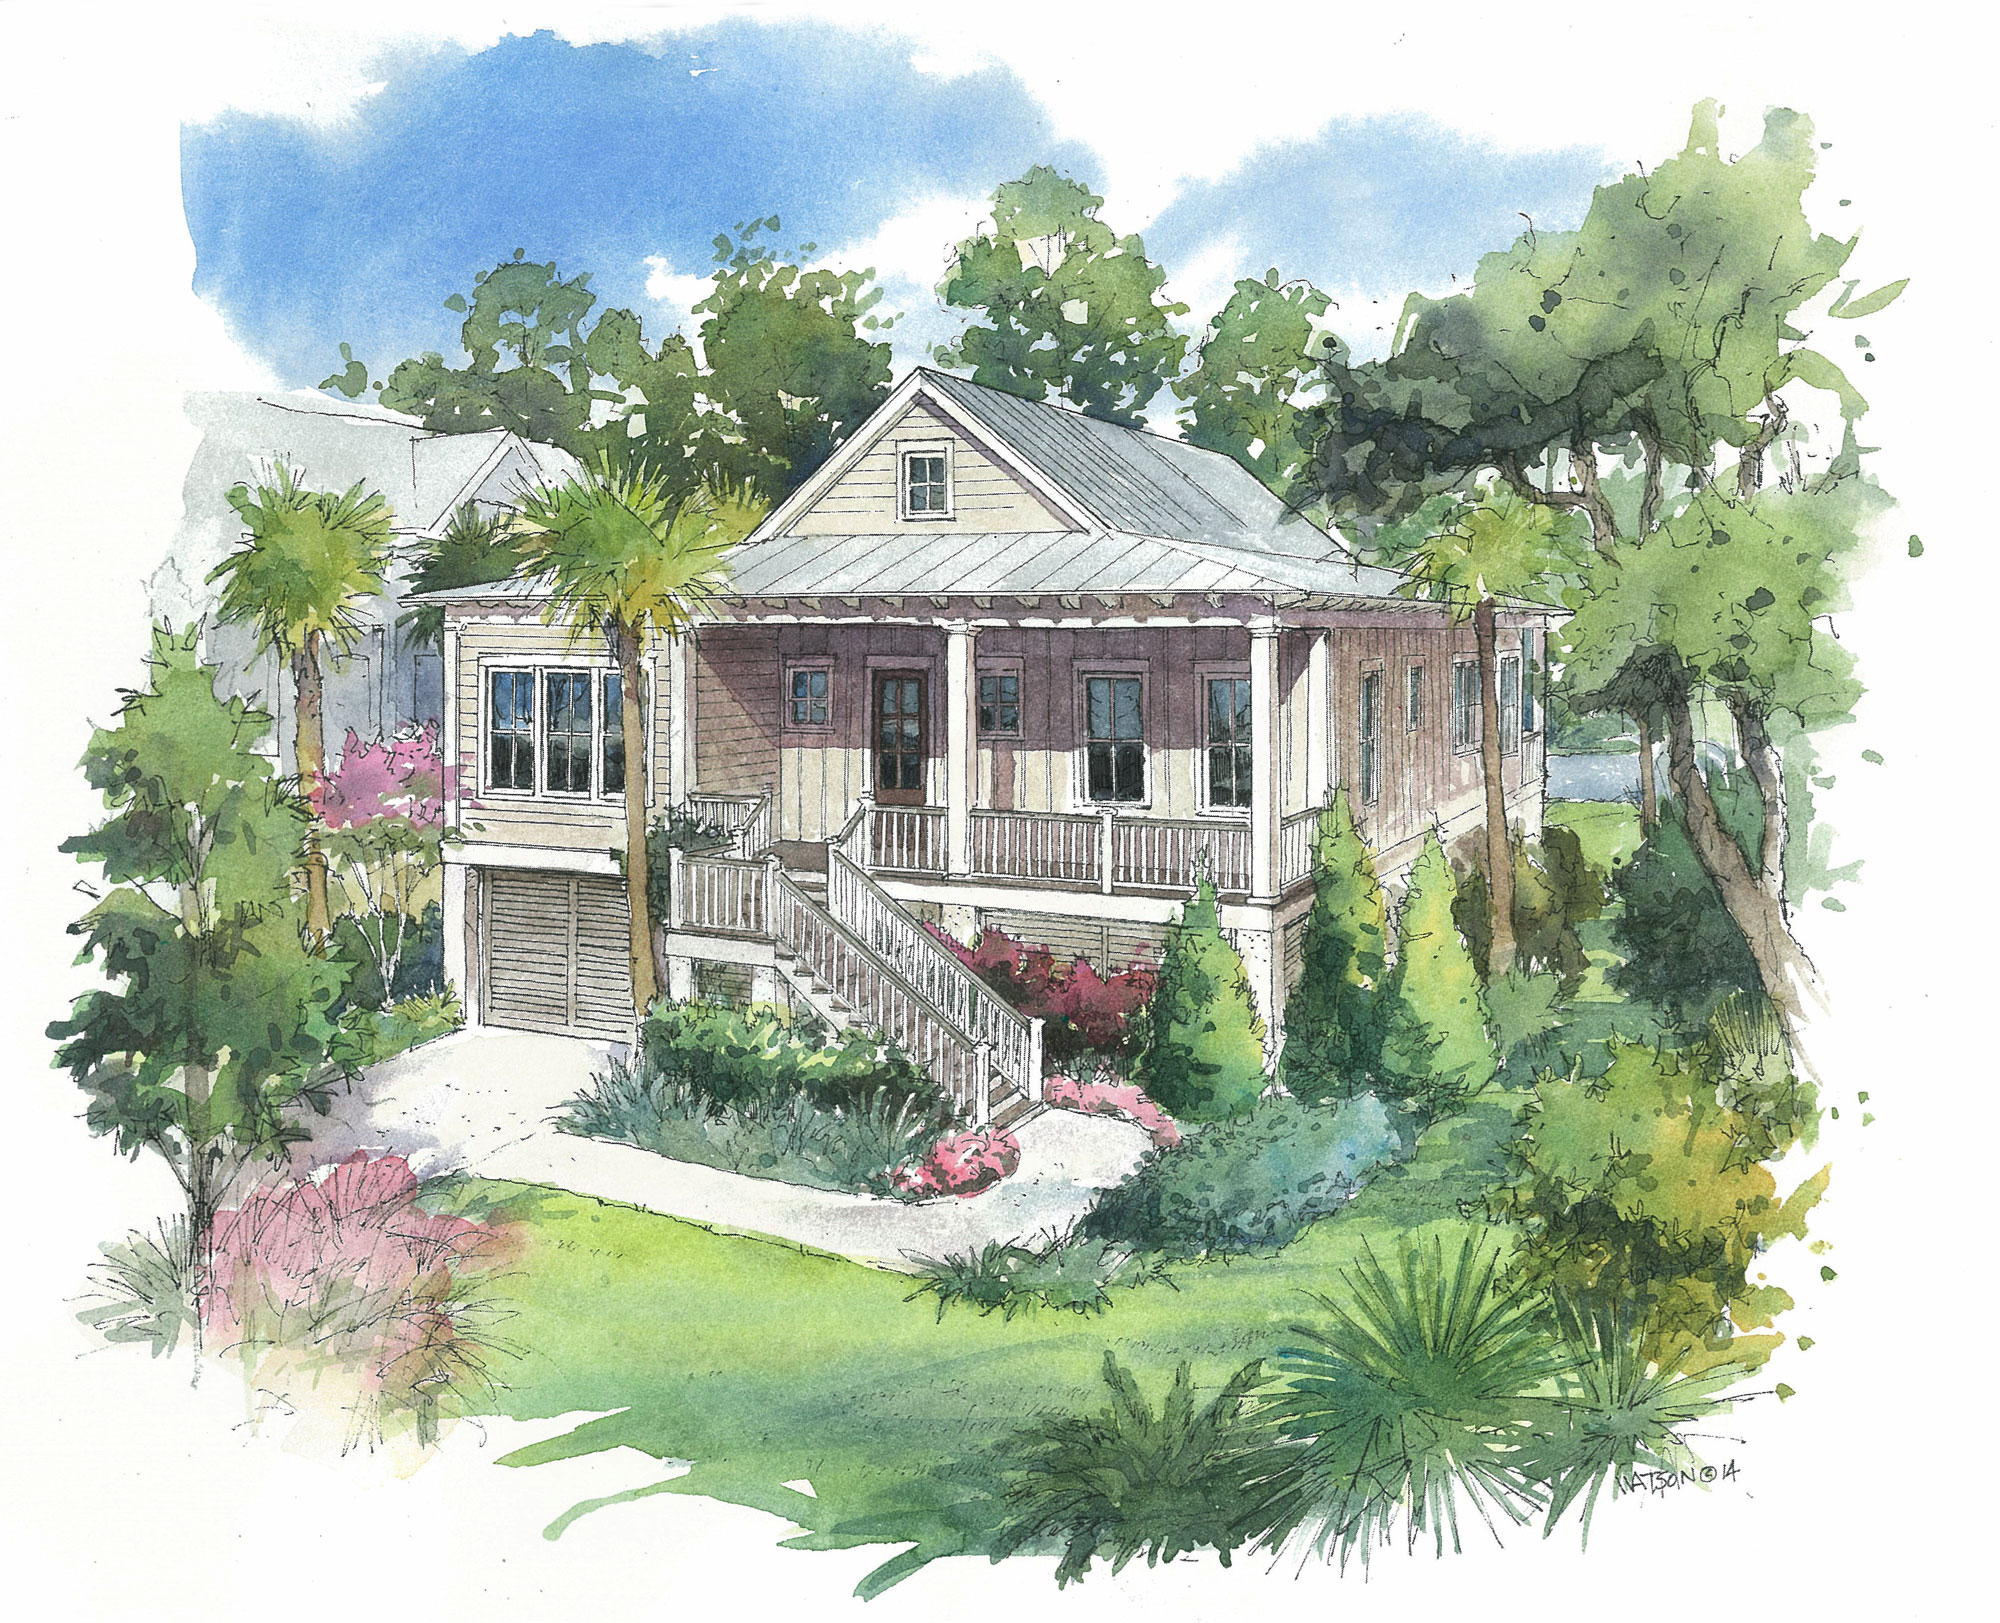 Loblolly Cottage floor plan availble direct from Swallowtail Architecture